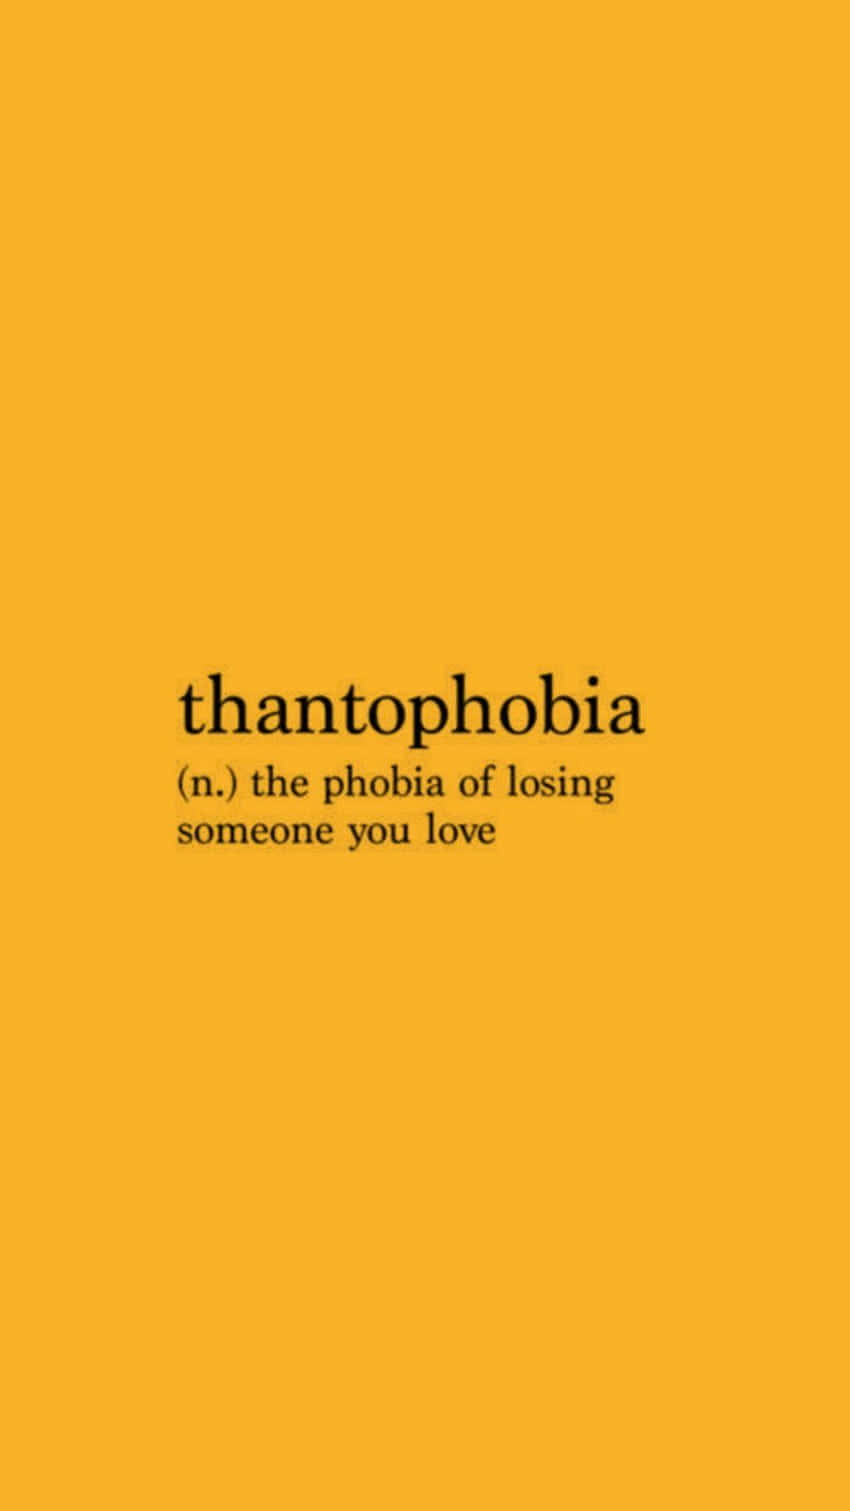 Thatophobia Go The Phobic Of Loving Someone You Love Wallpaper